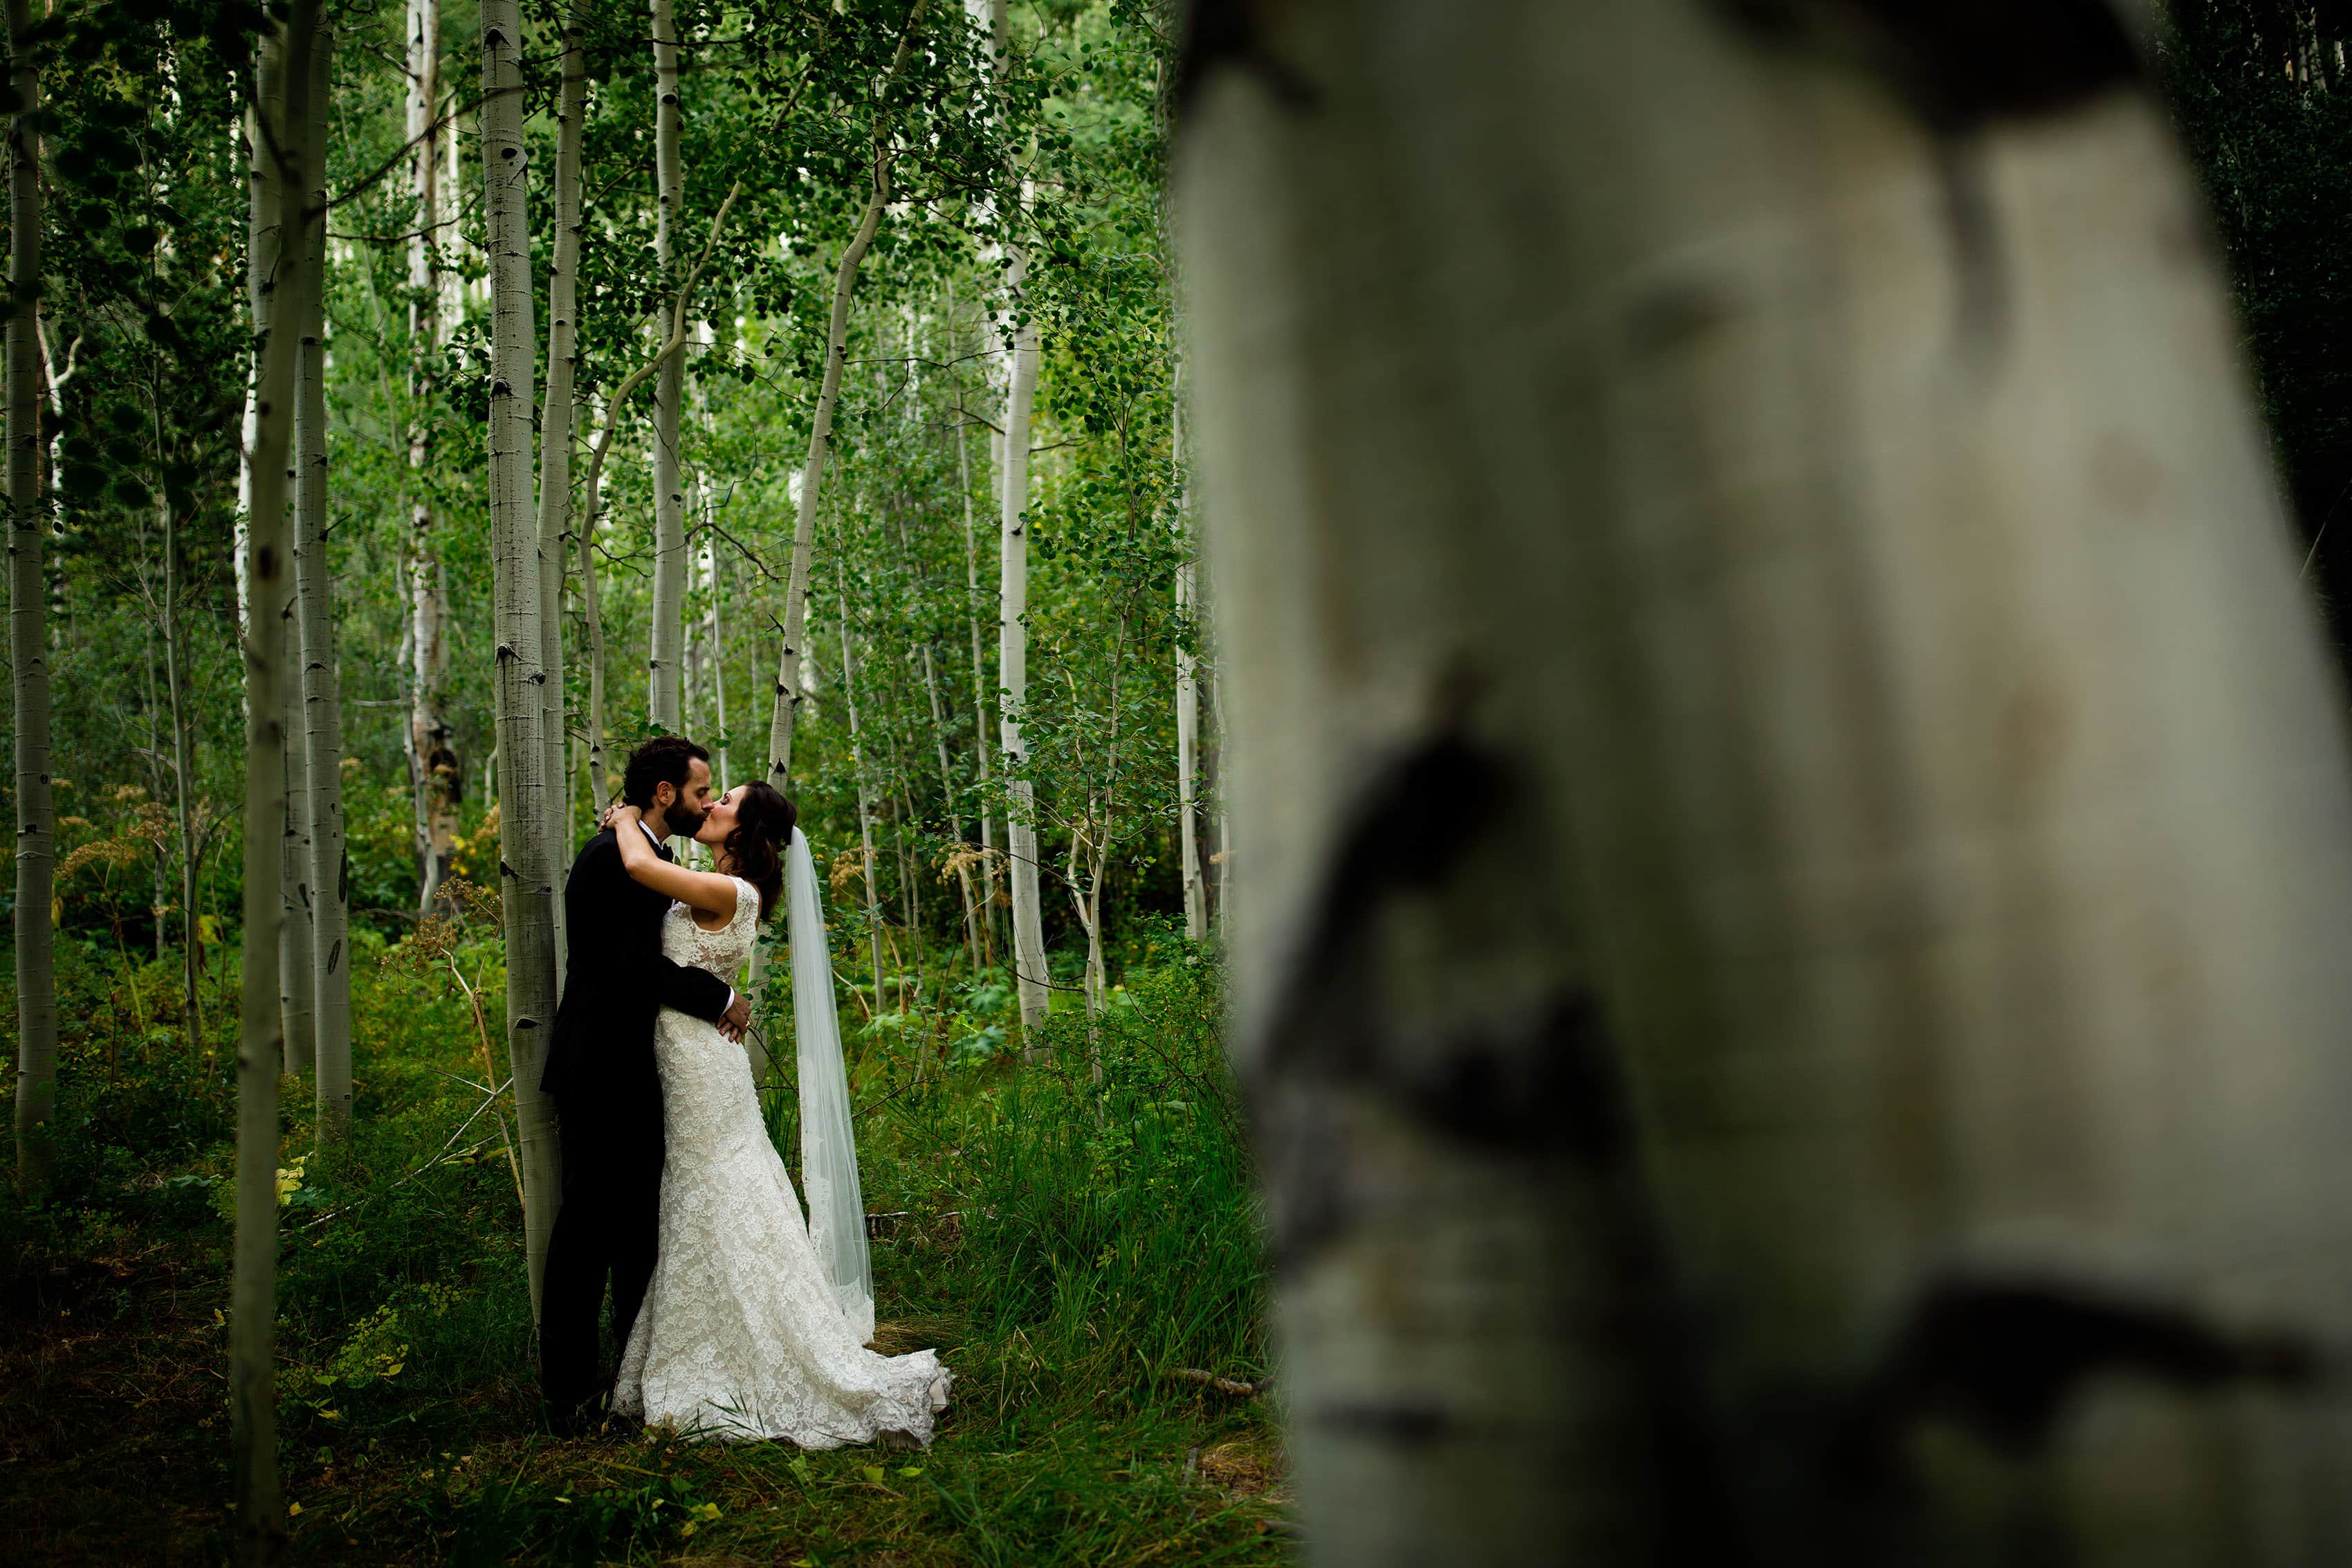 The couple share a kiss after their wedding in Vail